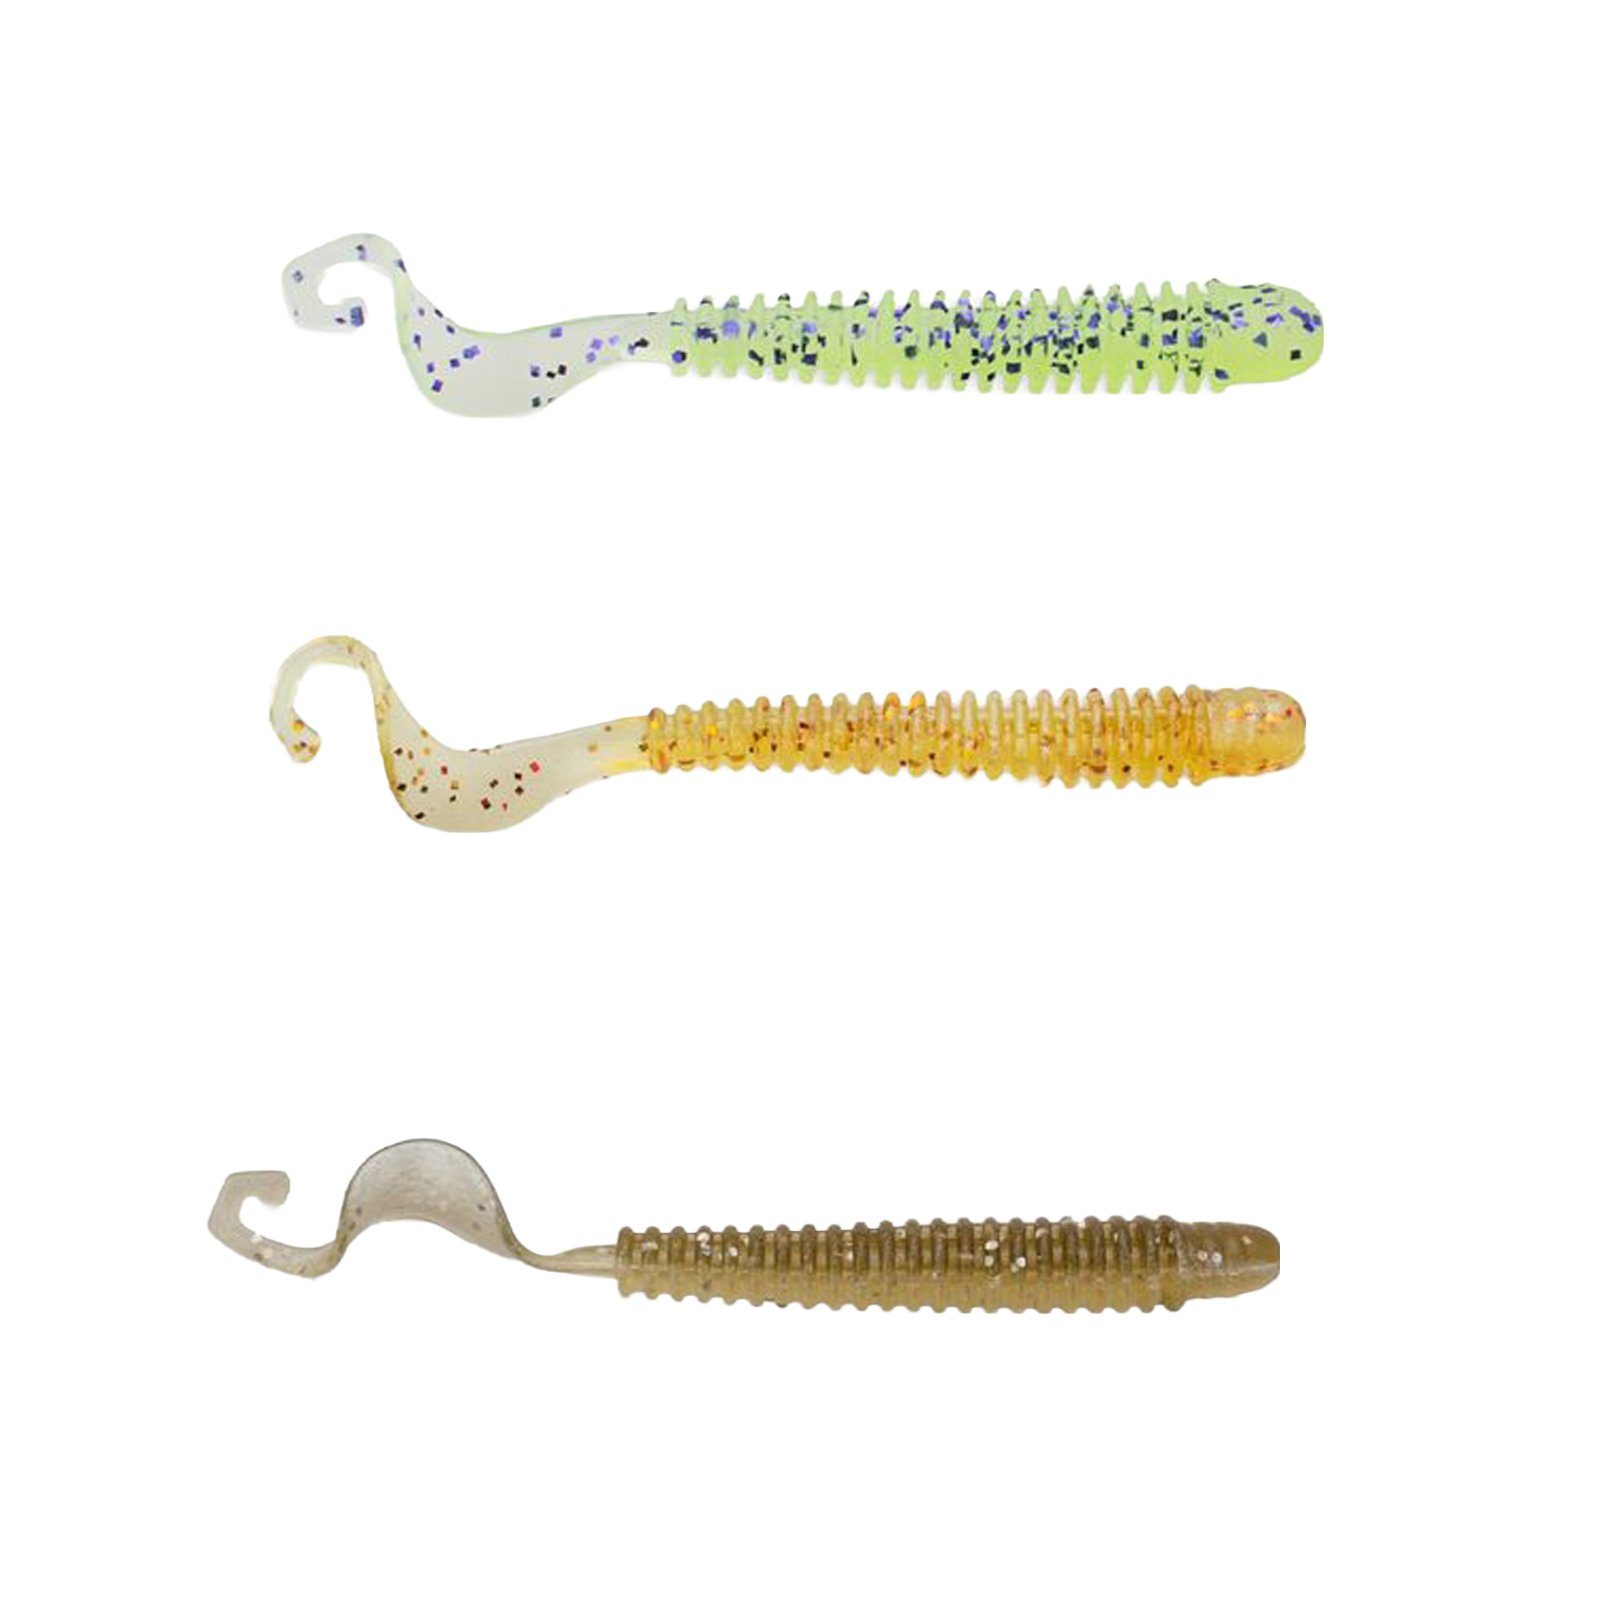 Gambler GTail Reins Shad BA-Edition Lures Saturn - - BA 5,0cm Undercover Twister Edition Micro Undercover 16Stk. Kunstköder, Shad